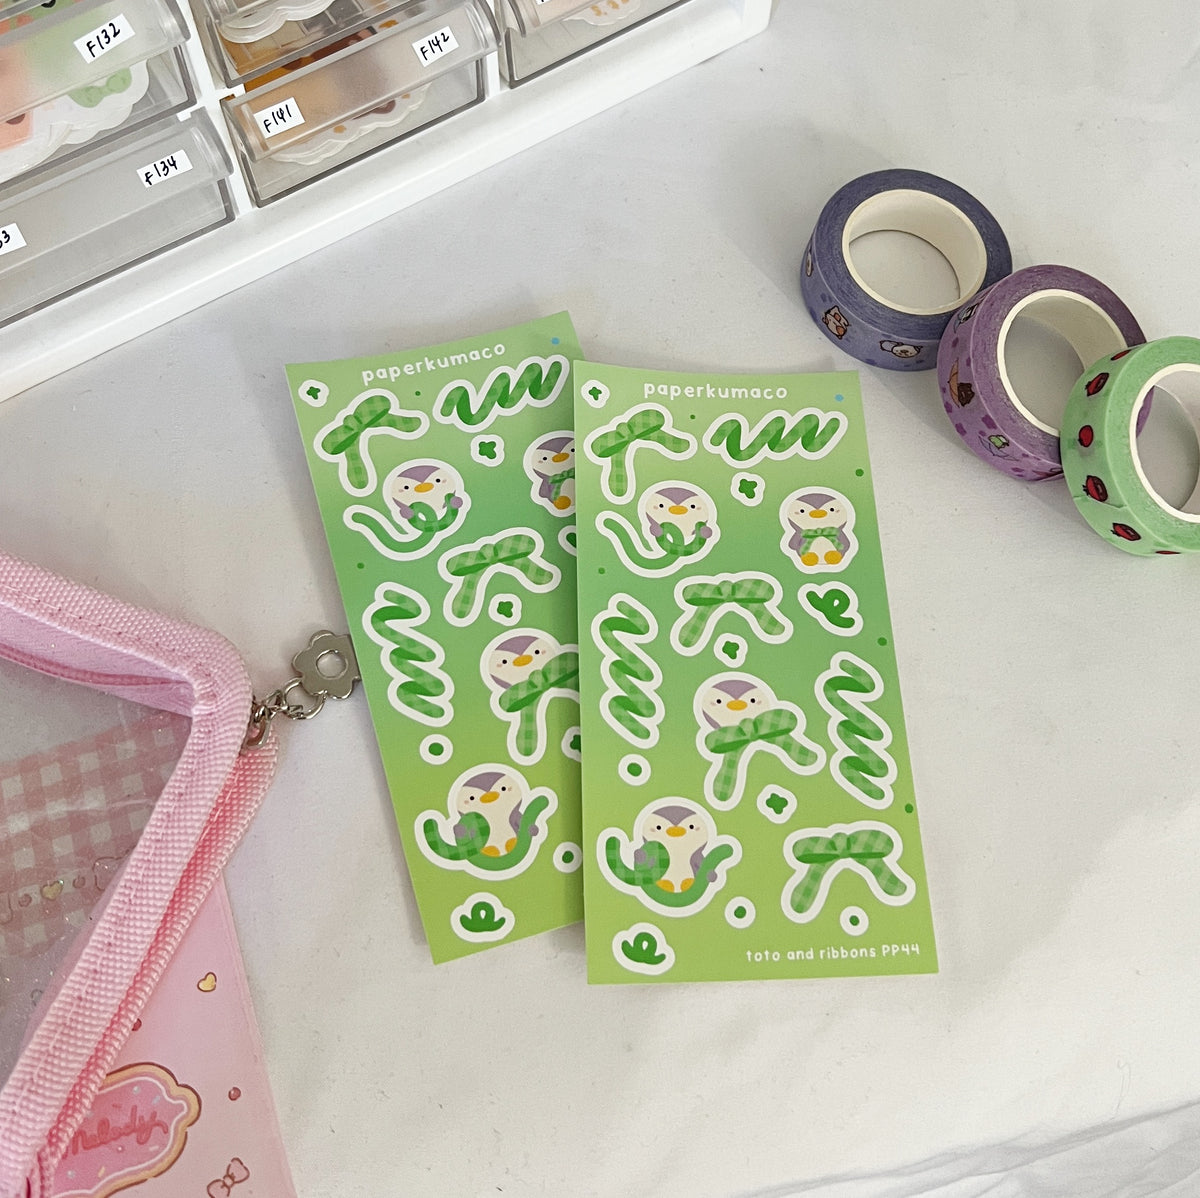 Toto and Ribbons Shimmer Sticker Sheet